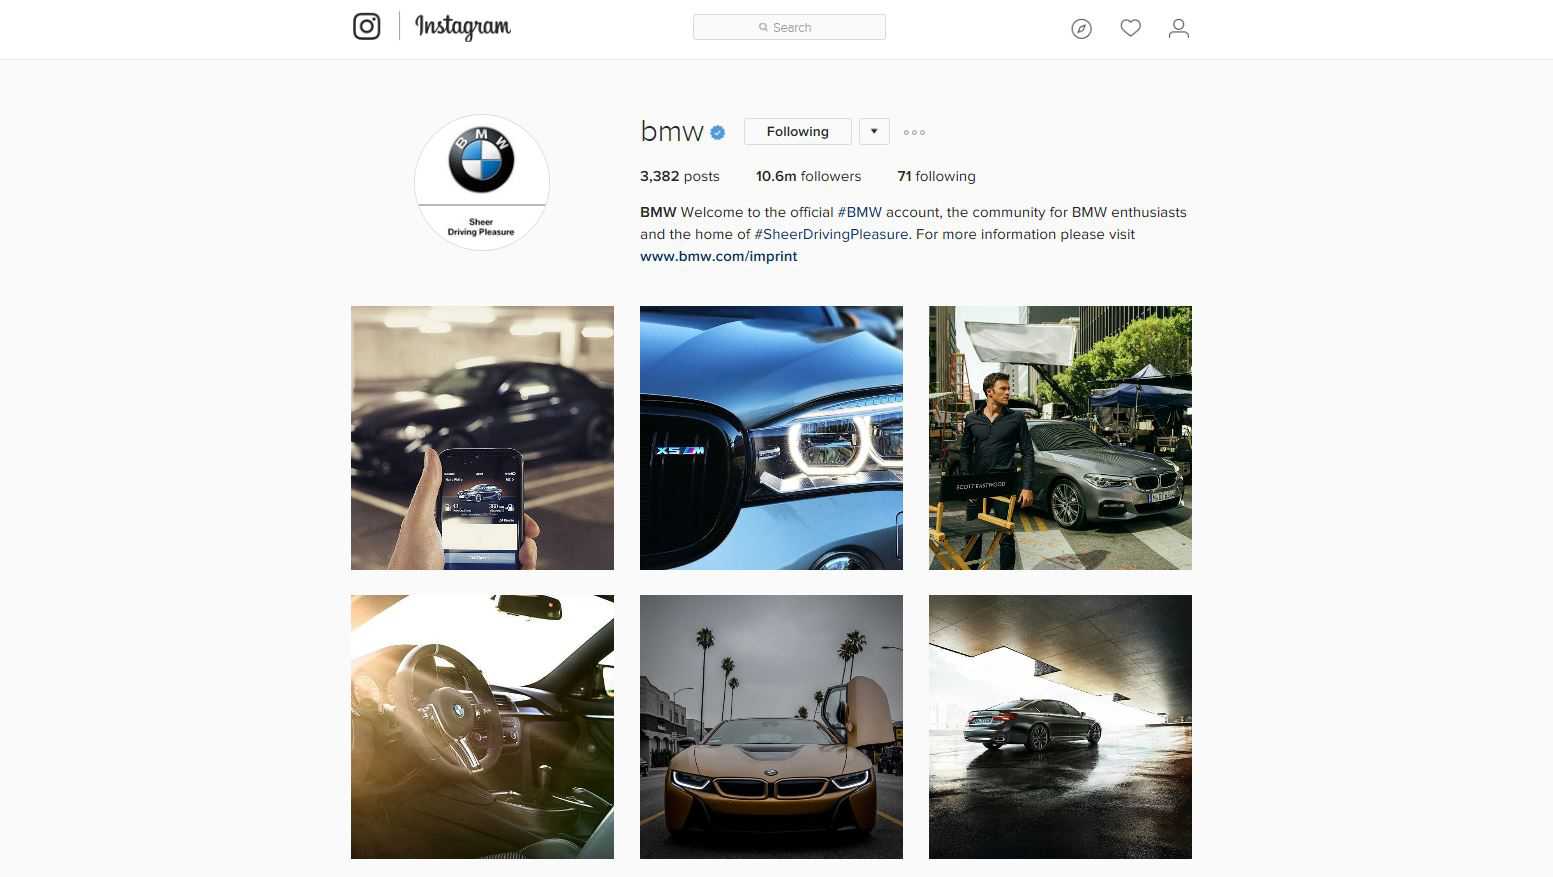 More than 10,000,000 Instagram followers for BMW. (02/2017)